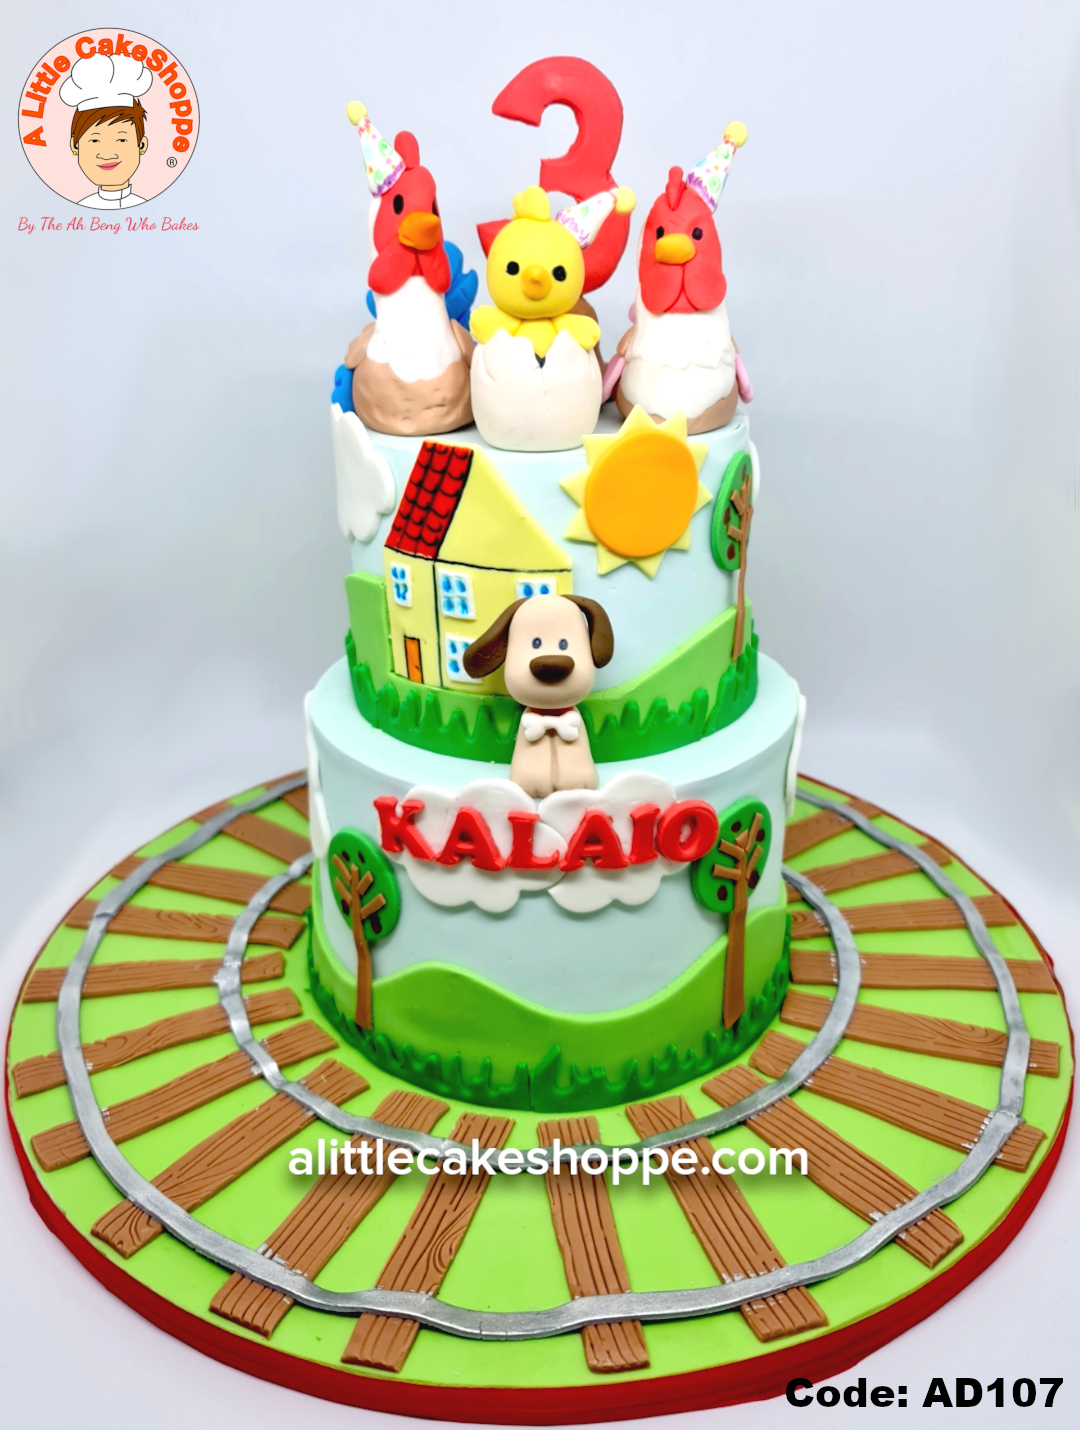 Best Cake Shop Singapore Delivery Best Customised Cake Shop Singapore customise cake custom cake 2D 3D birthday cake cupcakes desserts wedding corporate events anniversary 1st birthday 21st birthday fondant fresh cream buttercream cakes alittlecakeshoppe a little cake shoppe compliments review singapore bakers SG cake shop cakeshop ah beng who bakes sgbakes novelty cakes sgcakes licensed sfa nea cake delivery celebration cakes kids birthday cake surprise cake adult children animal farm house